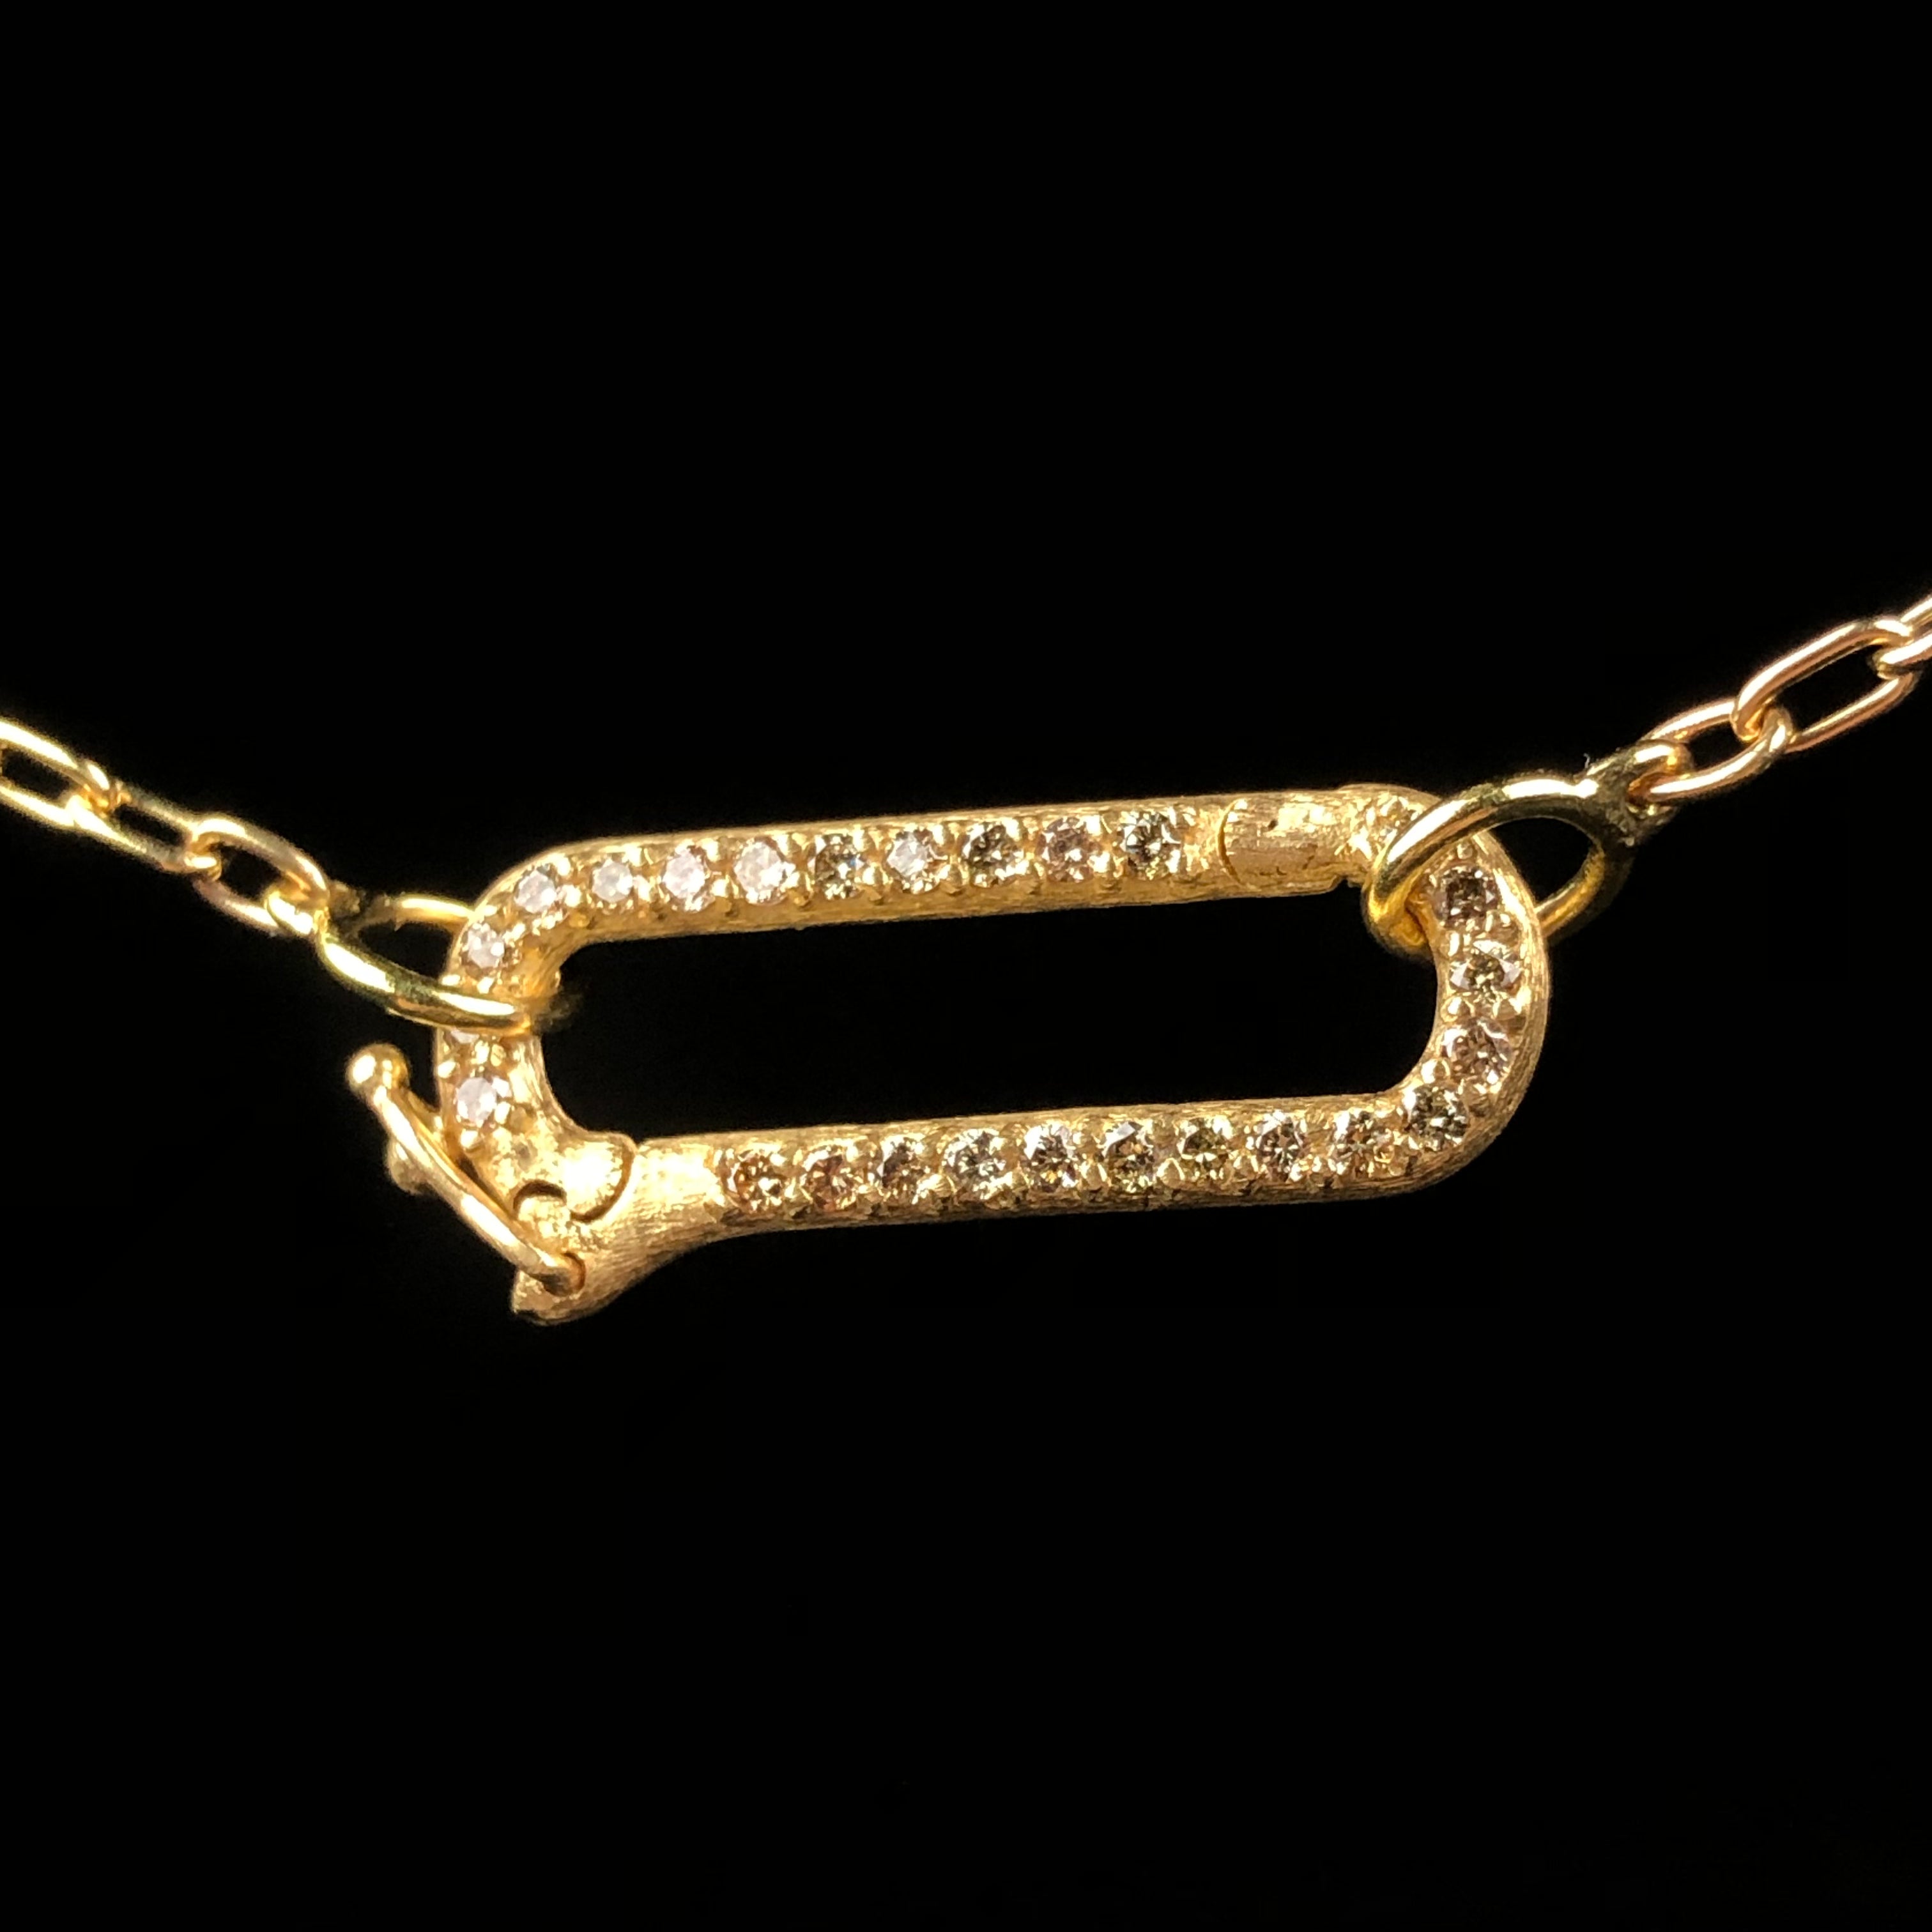 Champagne Diamond Paperclip Charm Holder or Chain Closure shown in closed and locked position